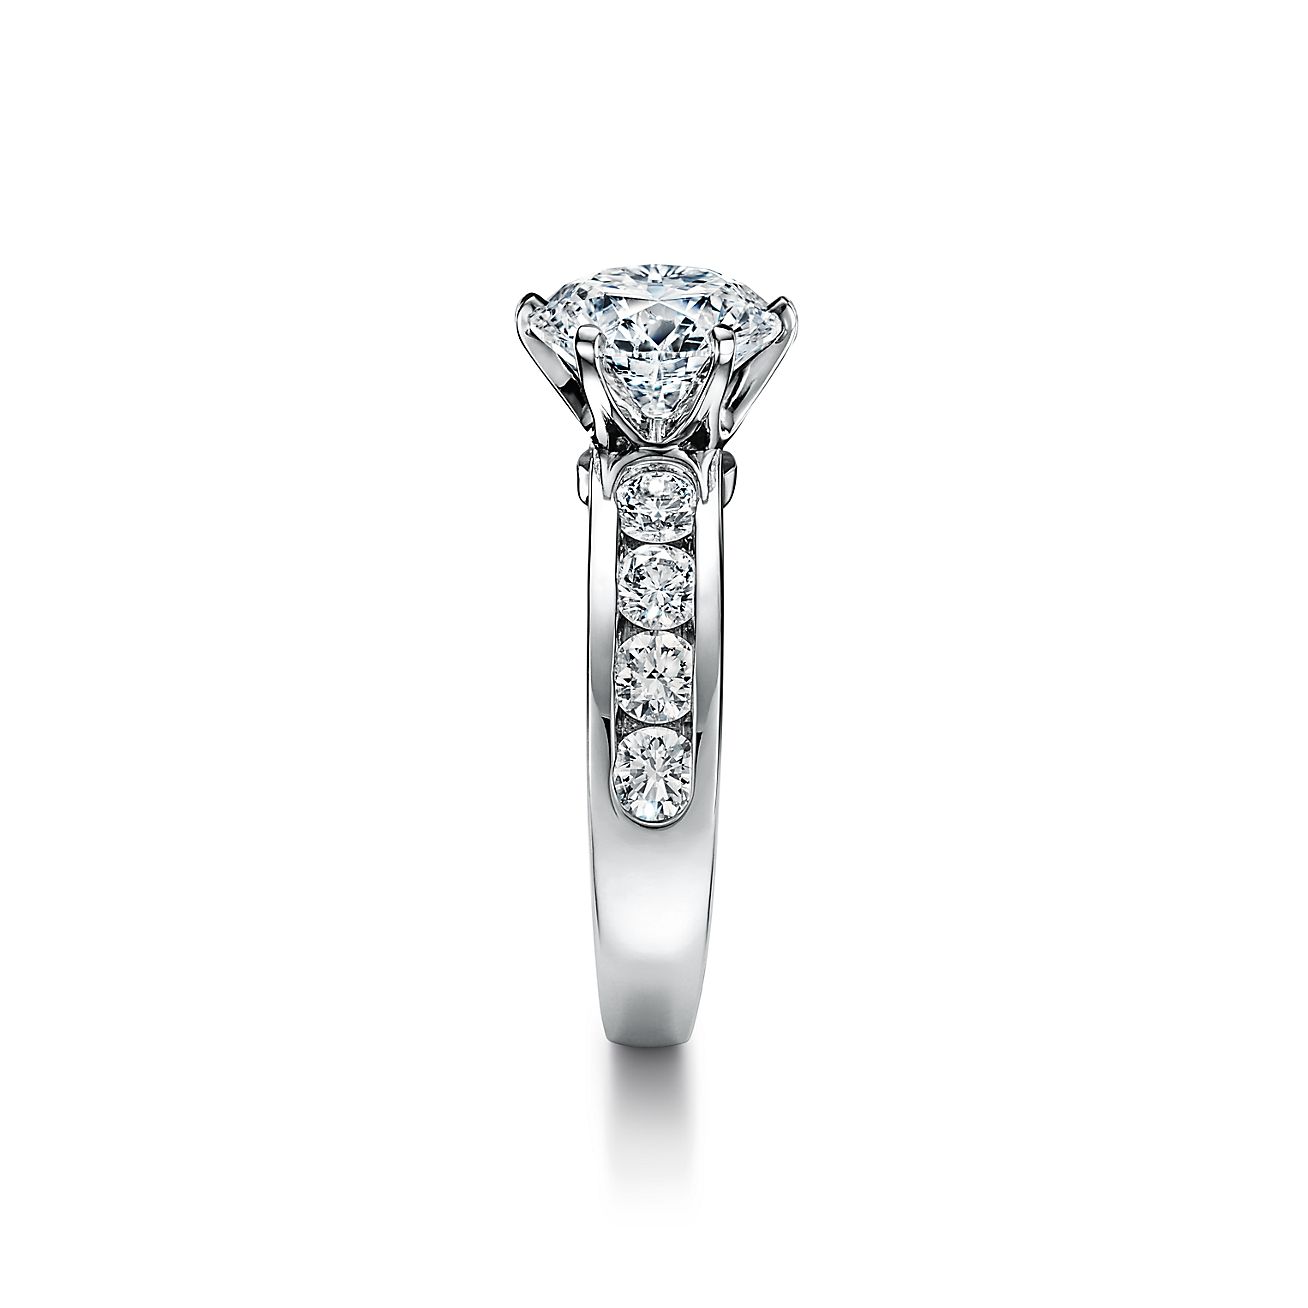 Tiffany® Setting Engagement Ring with 